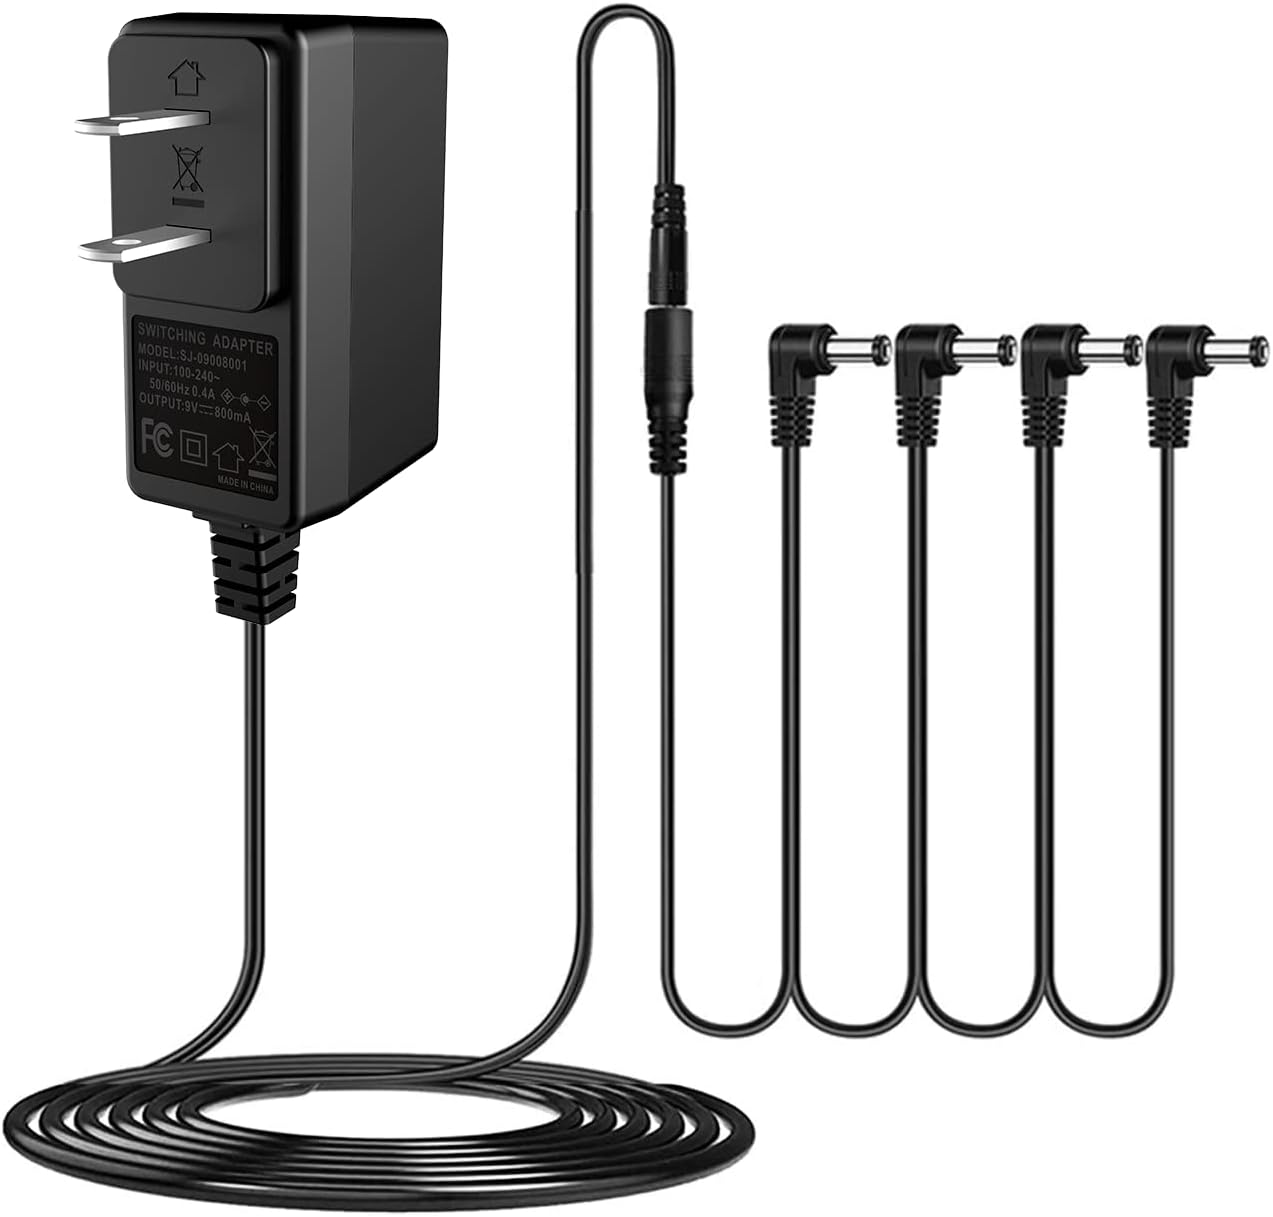 DC 9V Guitar Pedal Power Supply (800mA -1A) AC Wall Charger Adapter with 4 Way Daisy Chain Pedal Cables (8.8 FT), Compat